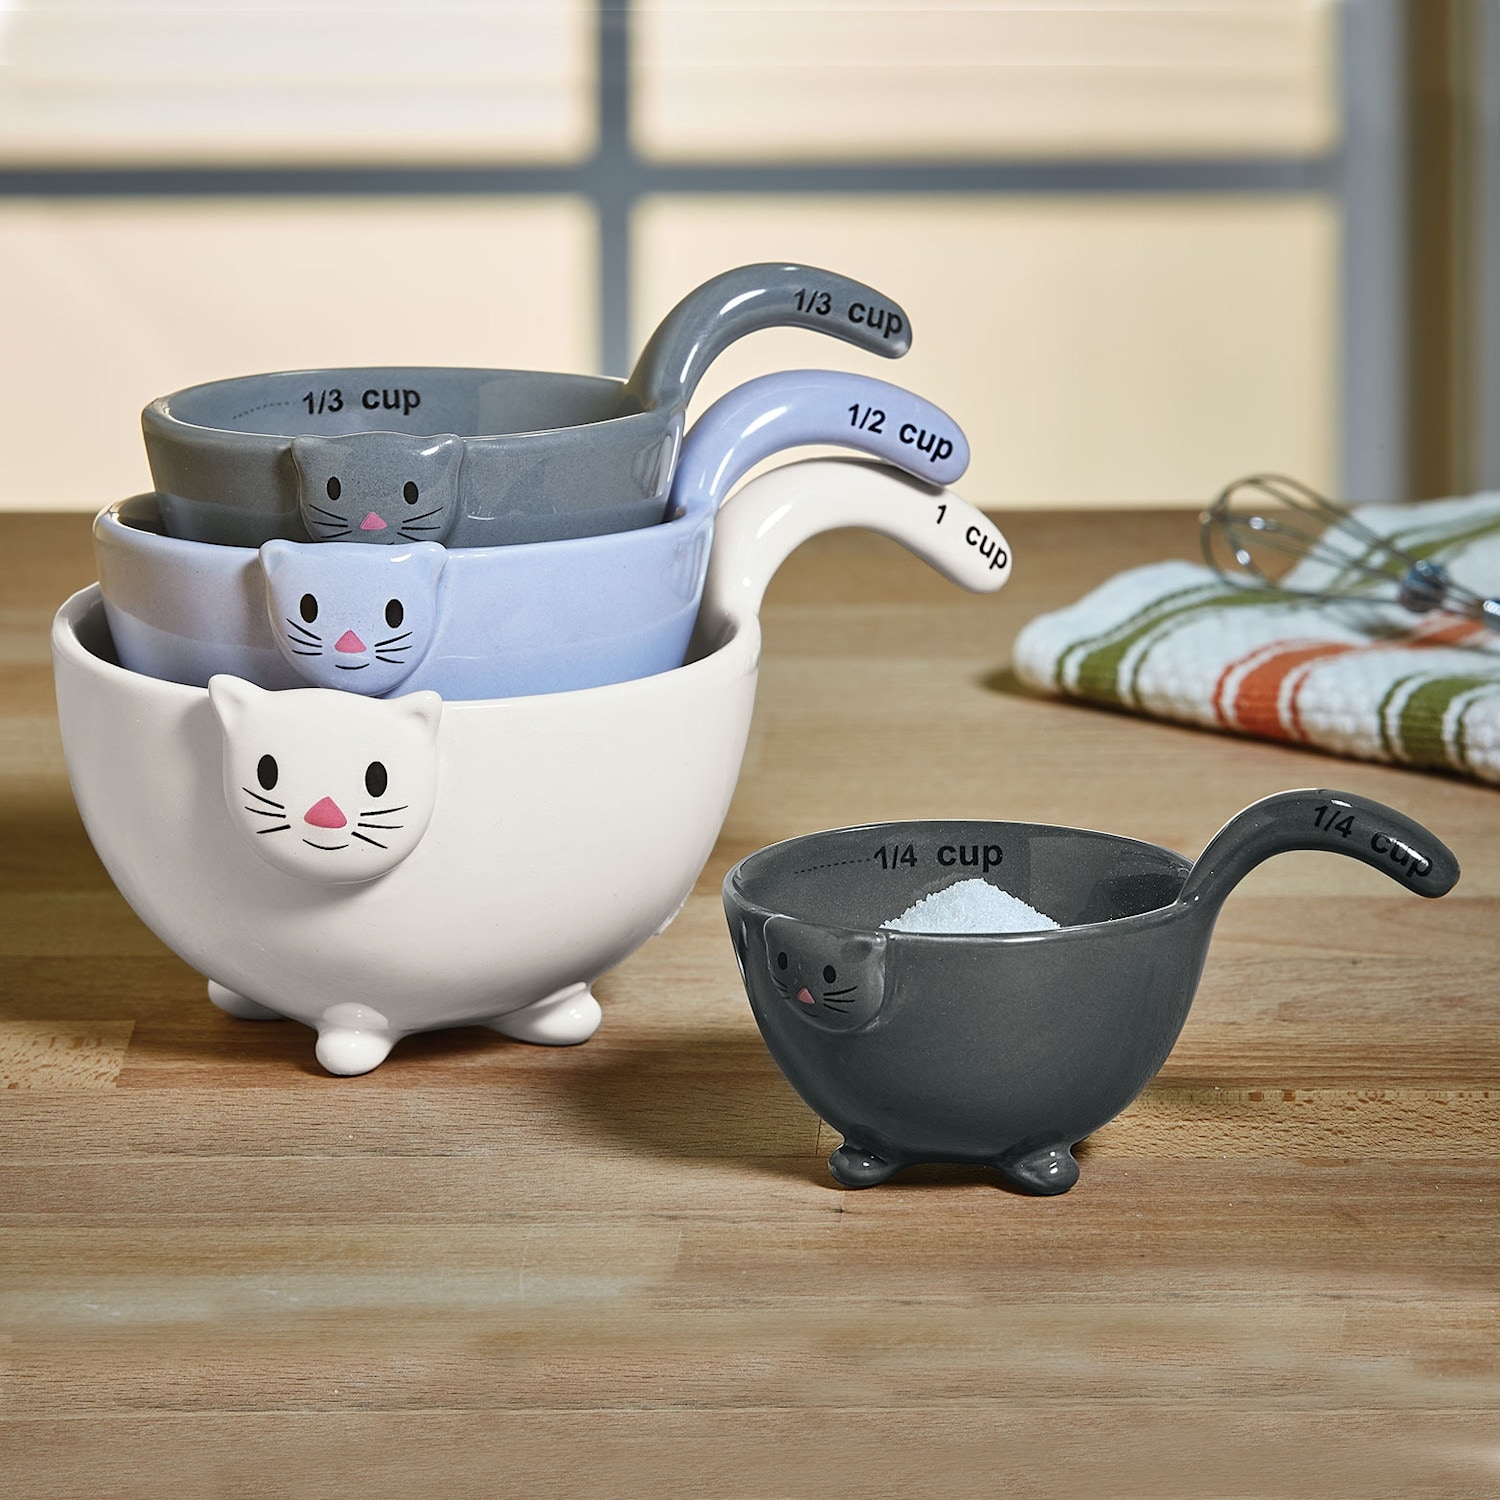 https://ak1.ostkcdn.com/images/products/is/images/direct/5285fb7ec7d221f719d7714c10b4c7267f9977d8/Cute-Ceramic-Cats-Measuring-Cups-Set---Stackable-Kitchen-Utensils---1-4-Cup%2C-1-3-Cup%2C-1-2-Cup-and-1-Cup-Sizes.jpg